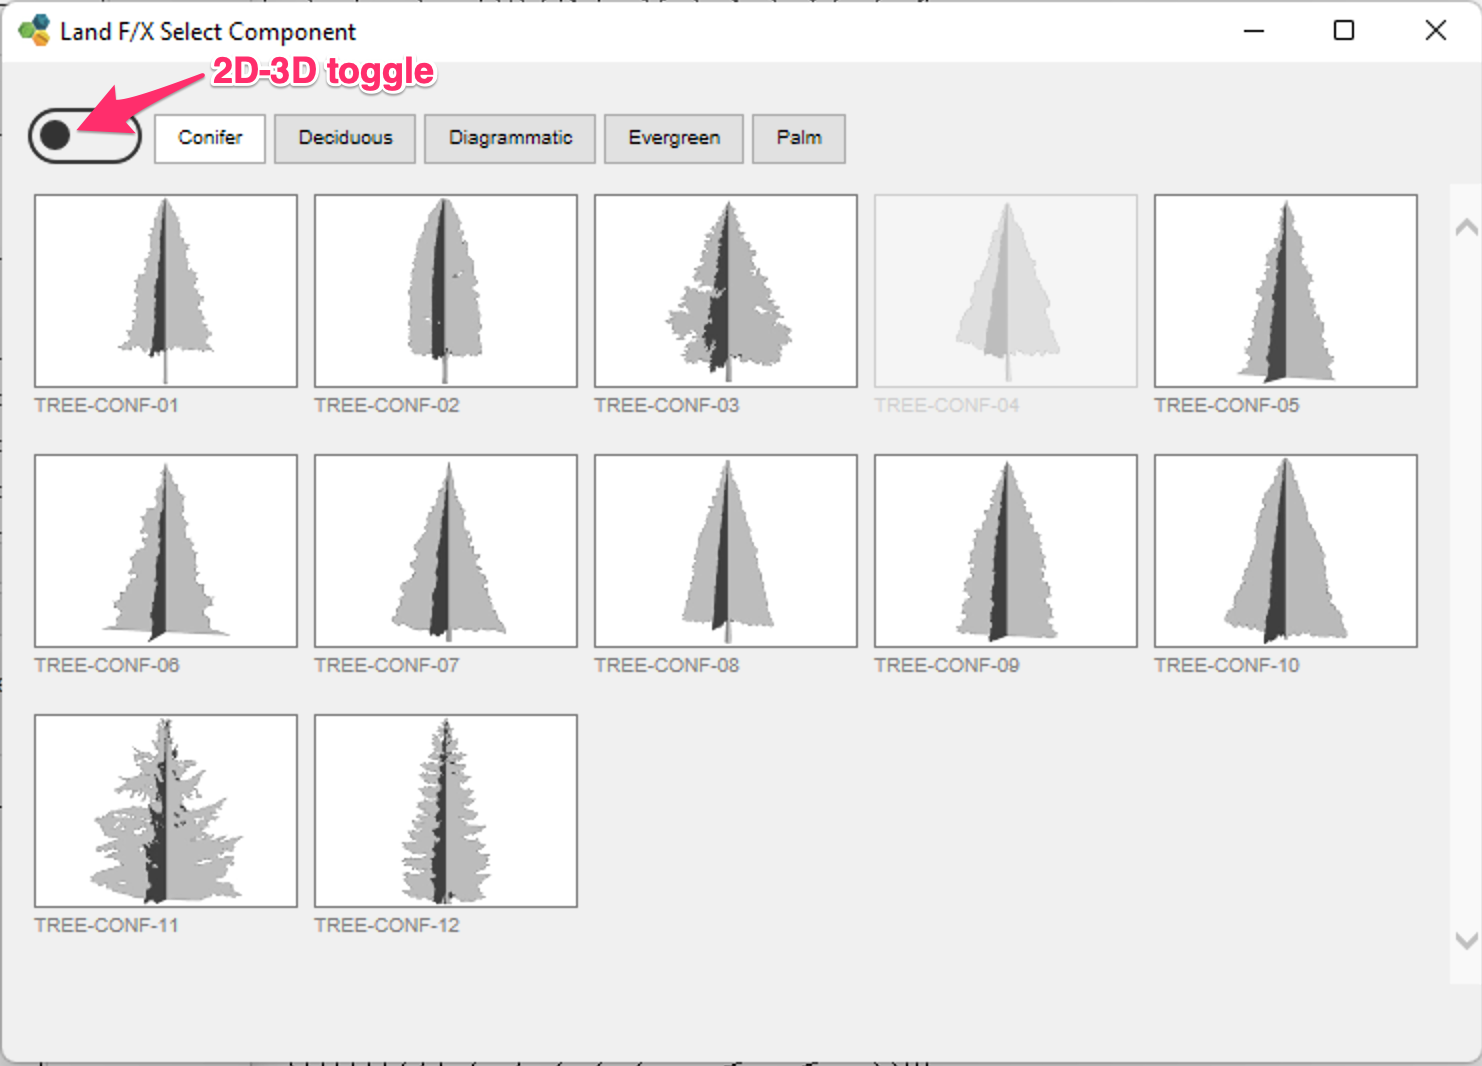 Individual symbols for trees and shrubs with 2D-3D toggle shown